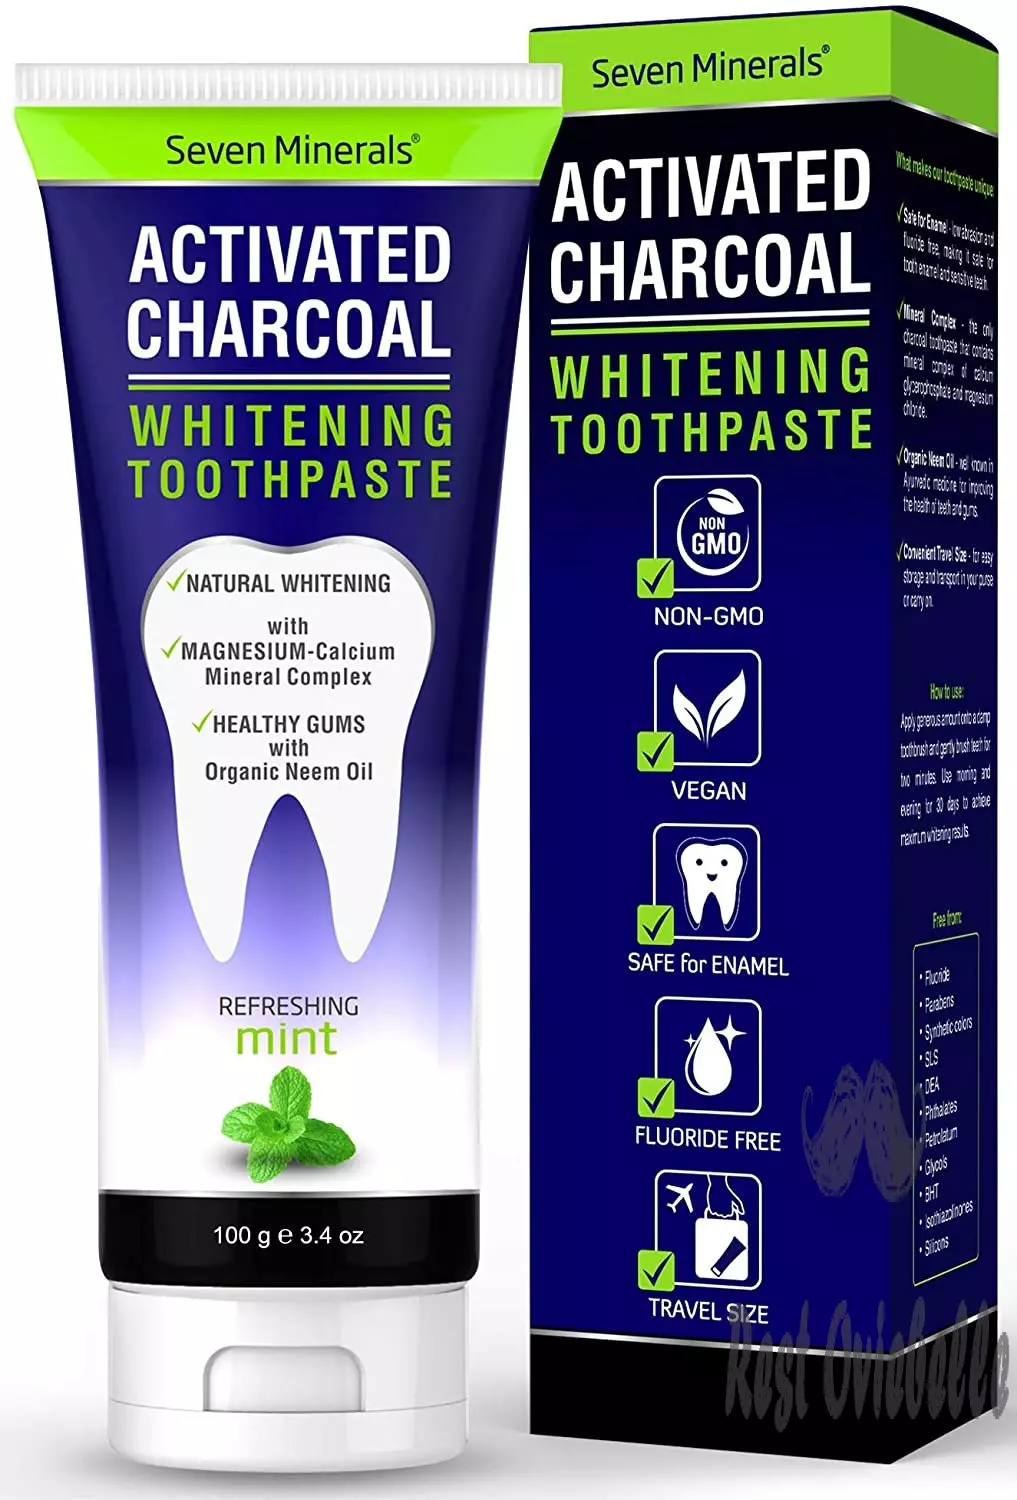 #1 Remineralizing Activated Charcoal Toothpaste